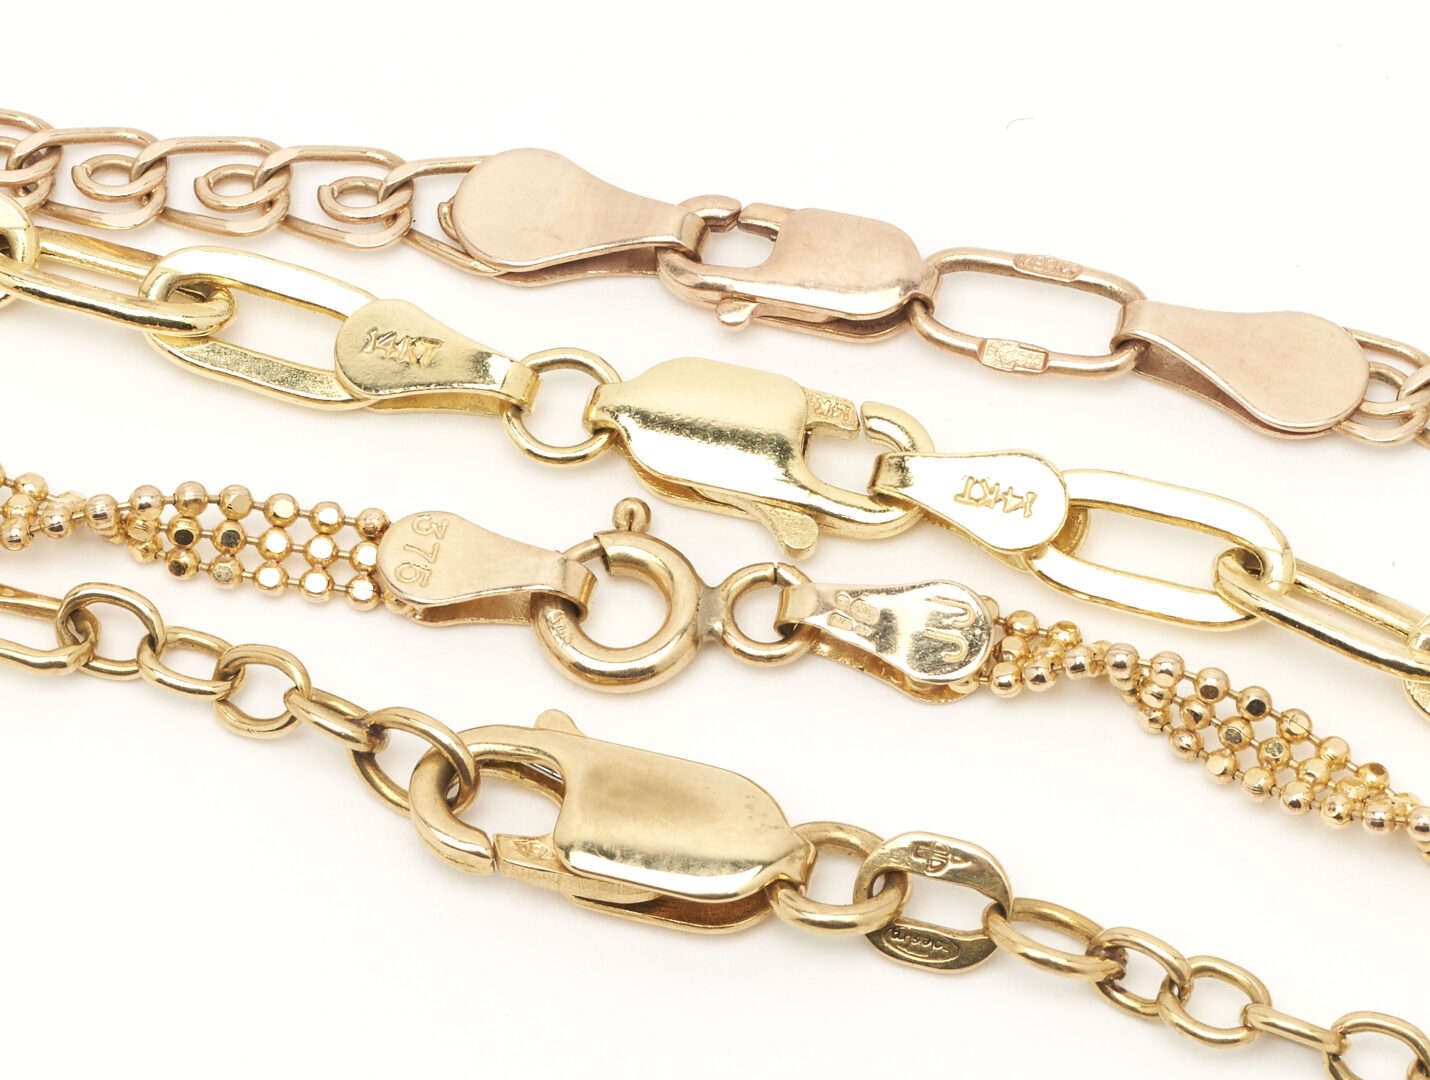 Lot 903: Group of 4 Yellow Gold Necklaces, 18K, 14K, 9K